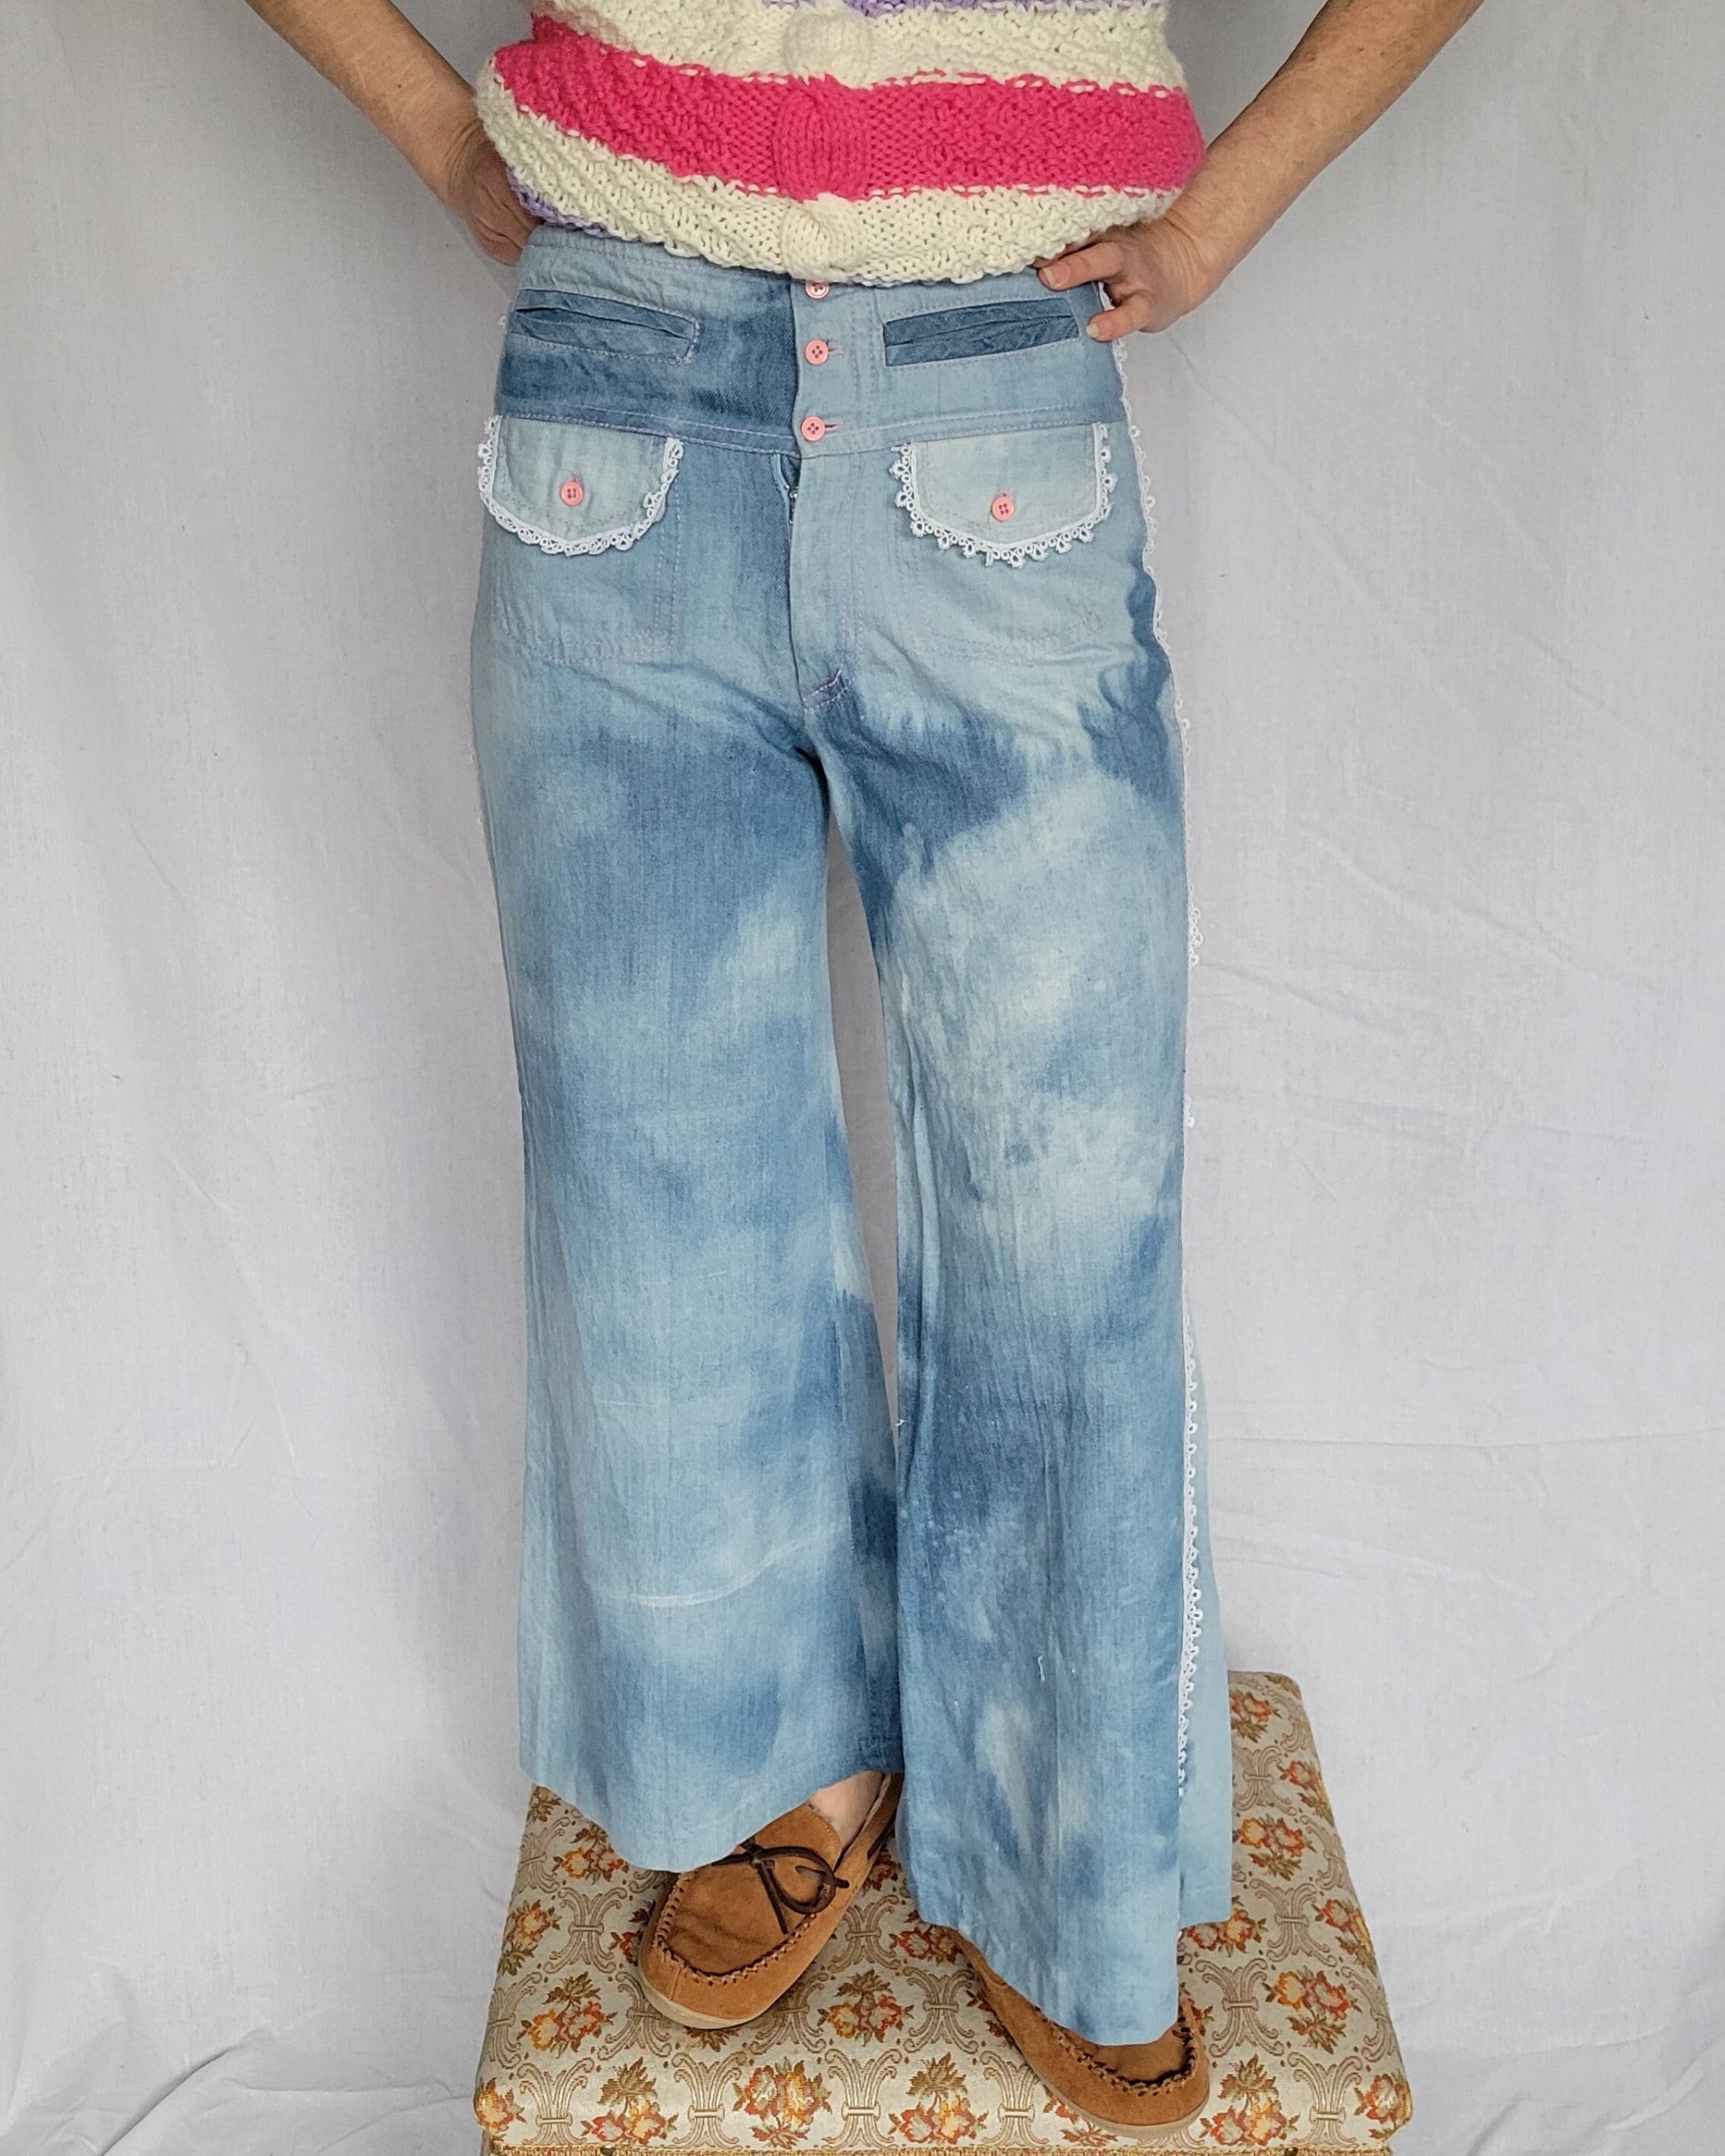 70s Faded Bell Bottom Jeans 30x30.5 / Vintage 1970s Faded Hip Hugger  Elephant Bellbottom Jeans / 1970s 30 31 Waist Flared Jeans